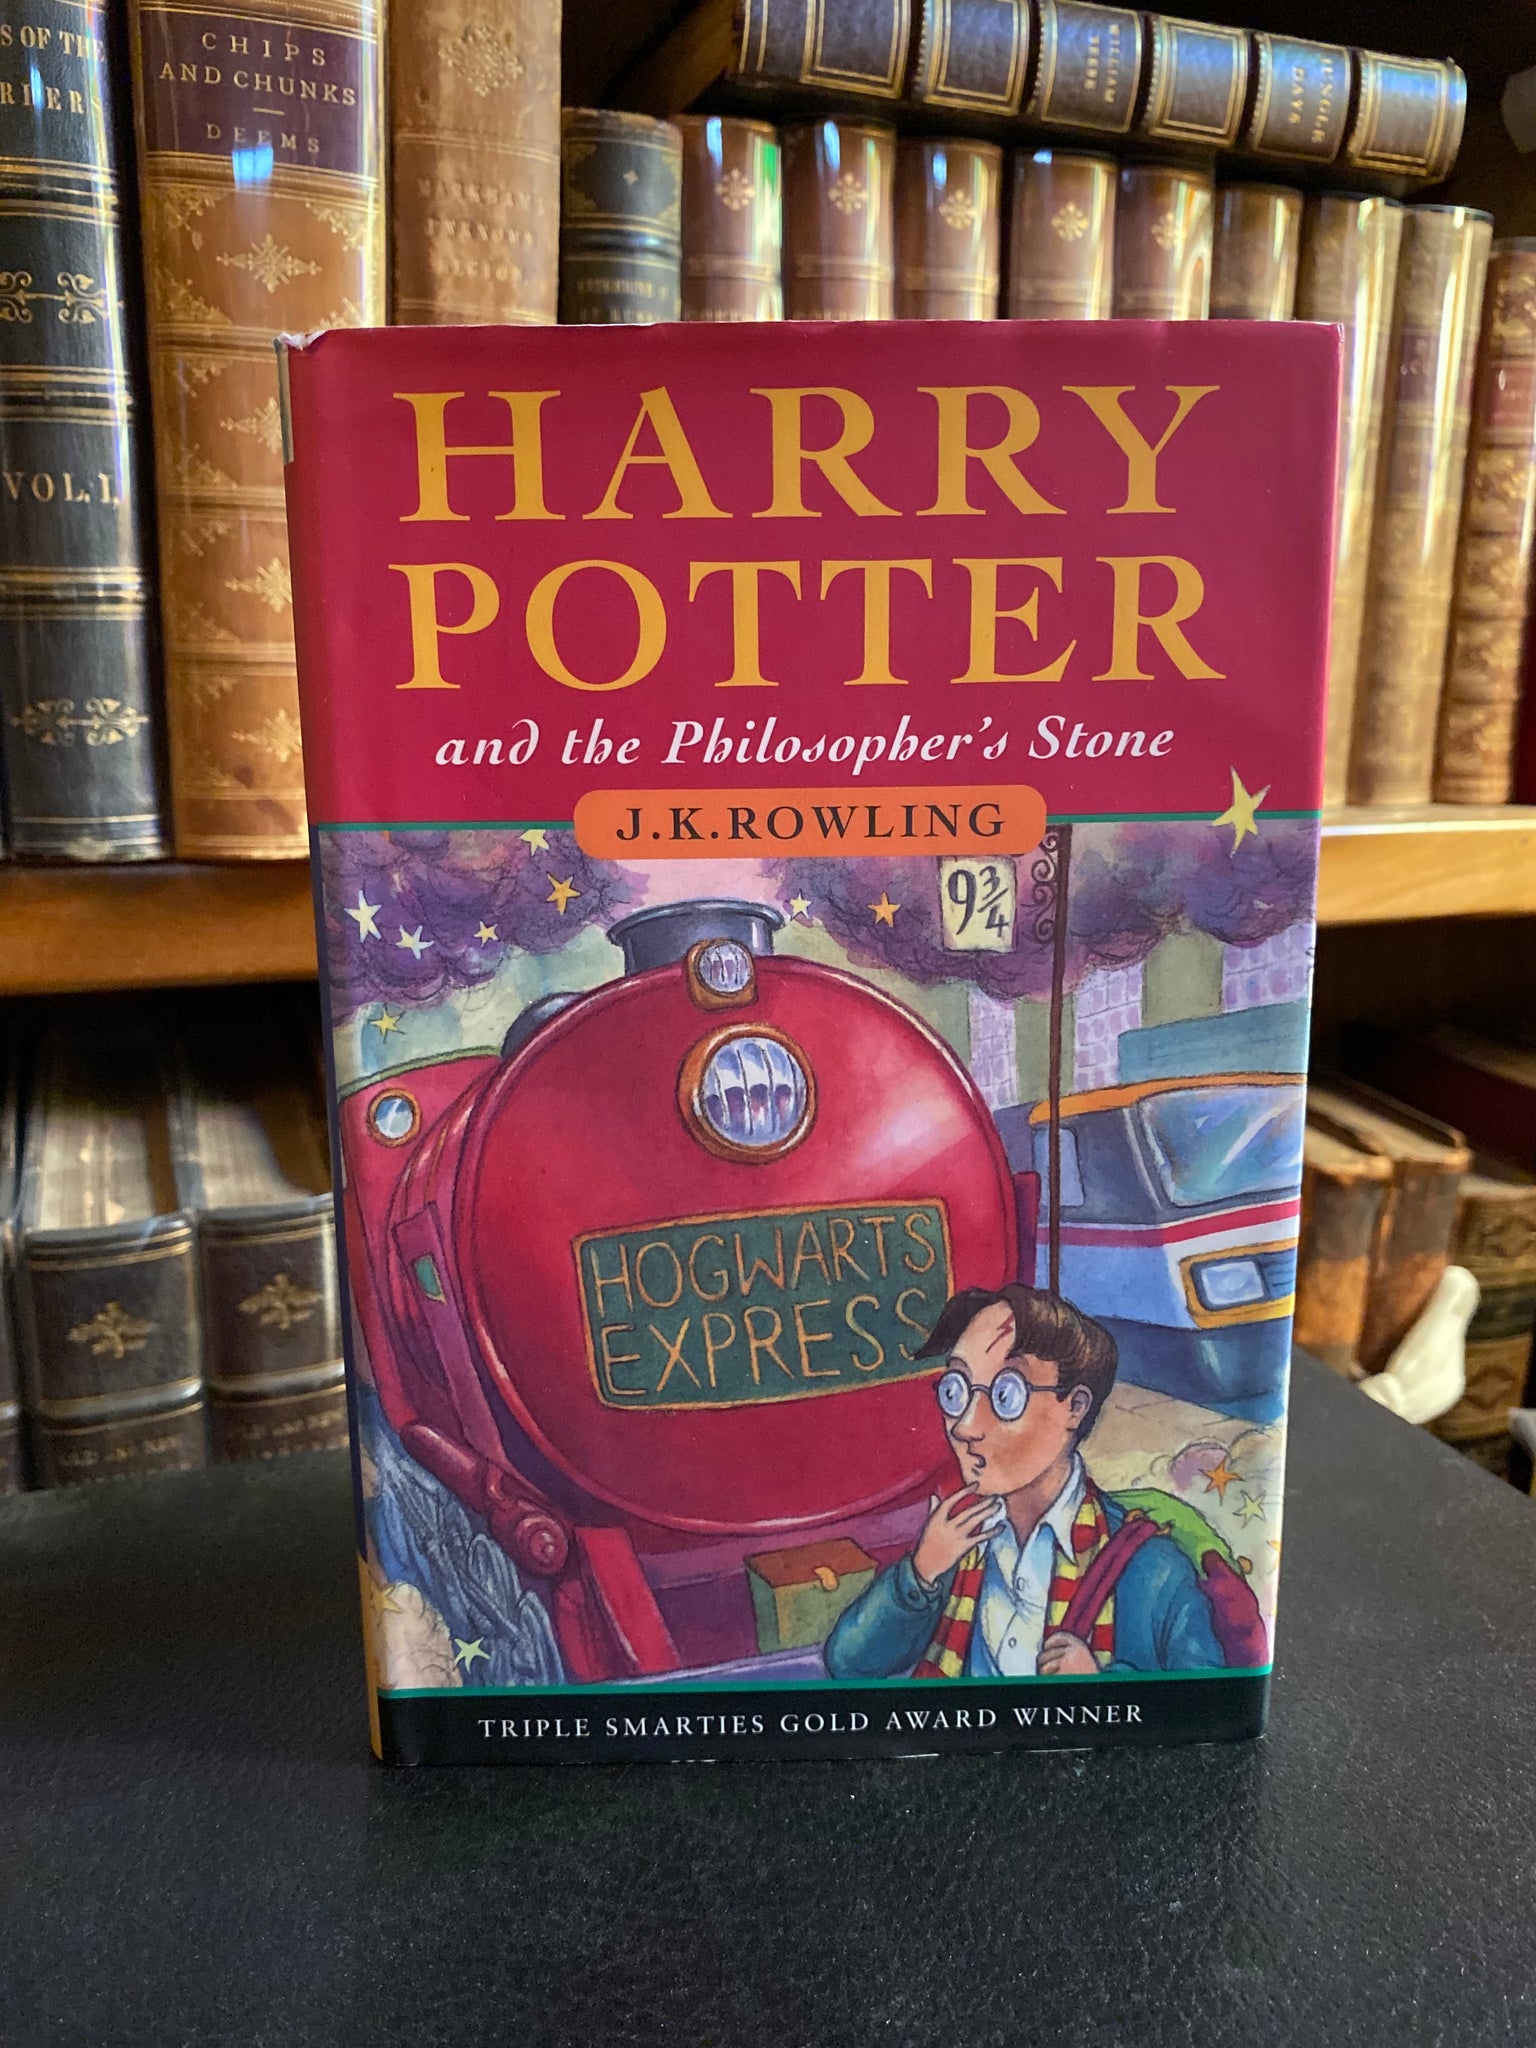 Harry Potter and the Philosopher's Stone (1997 UK Edition, 22nd Impression of the First Edition)